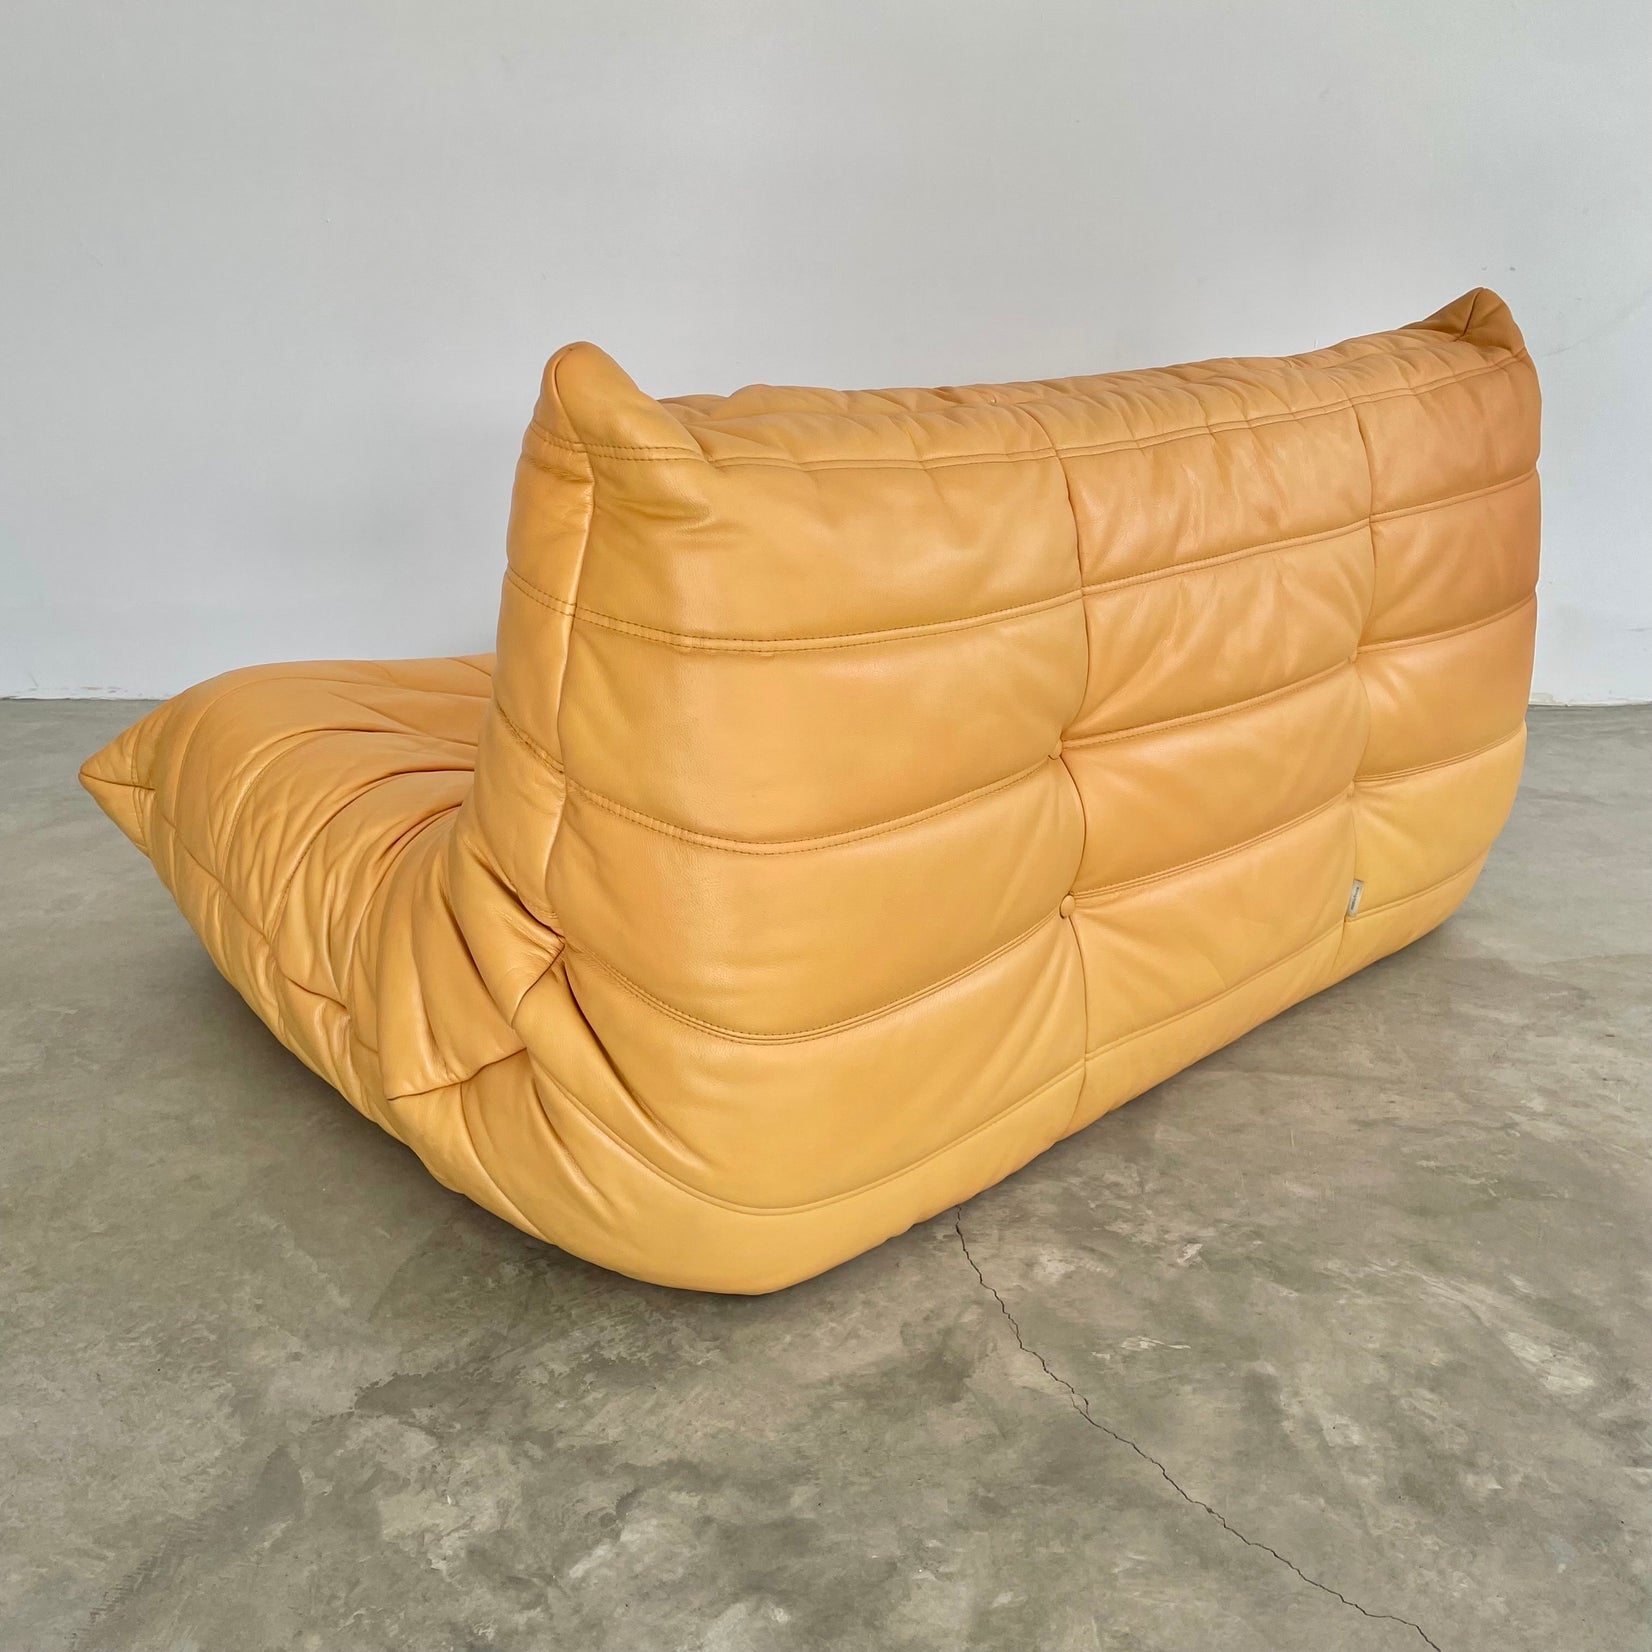 Two Seater Togo Sofa in Yellow Leather by Ligne Roset, 1980s France